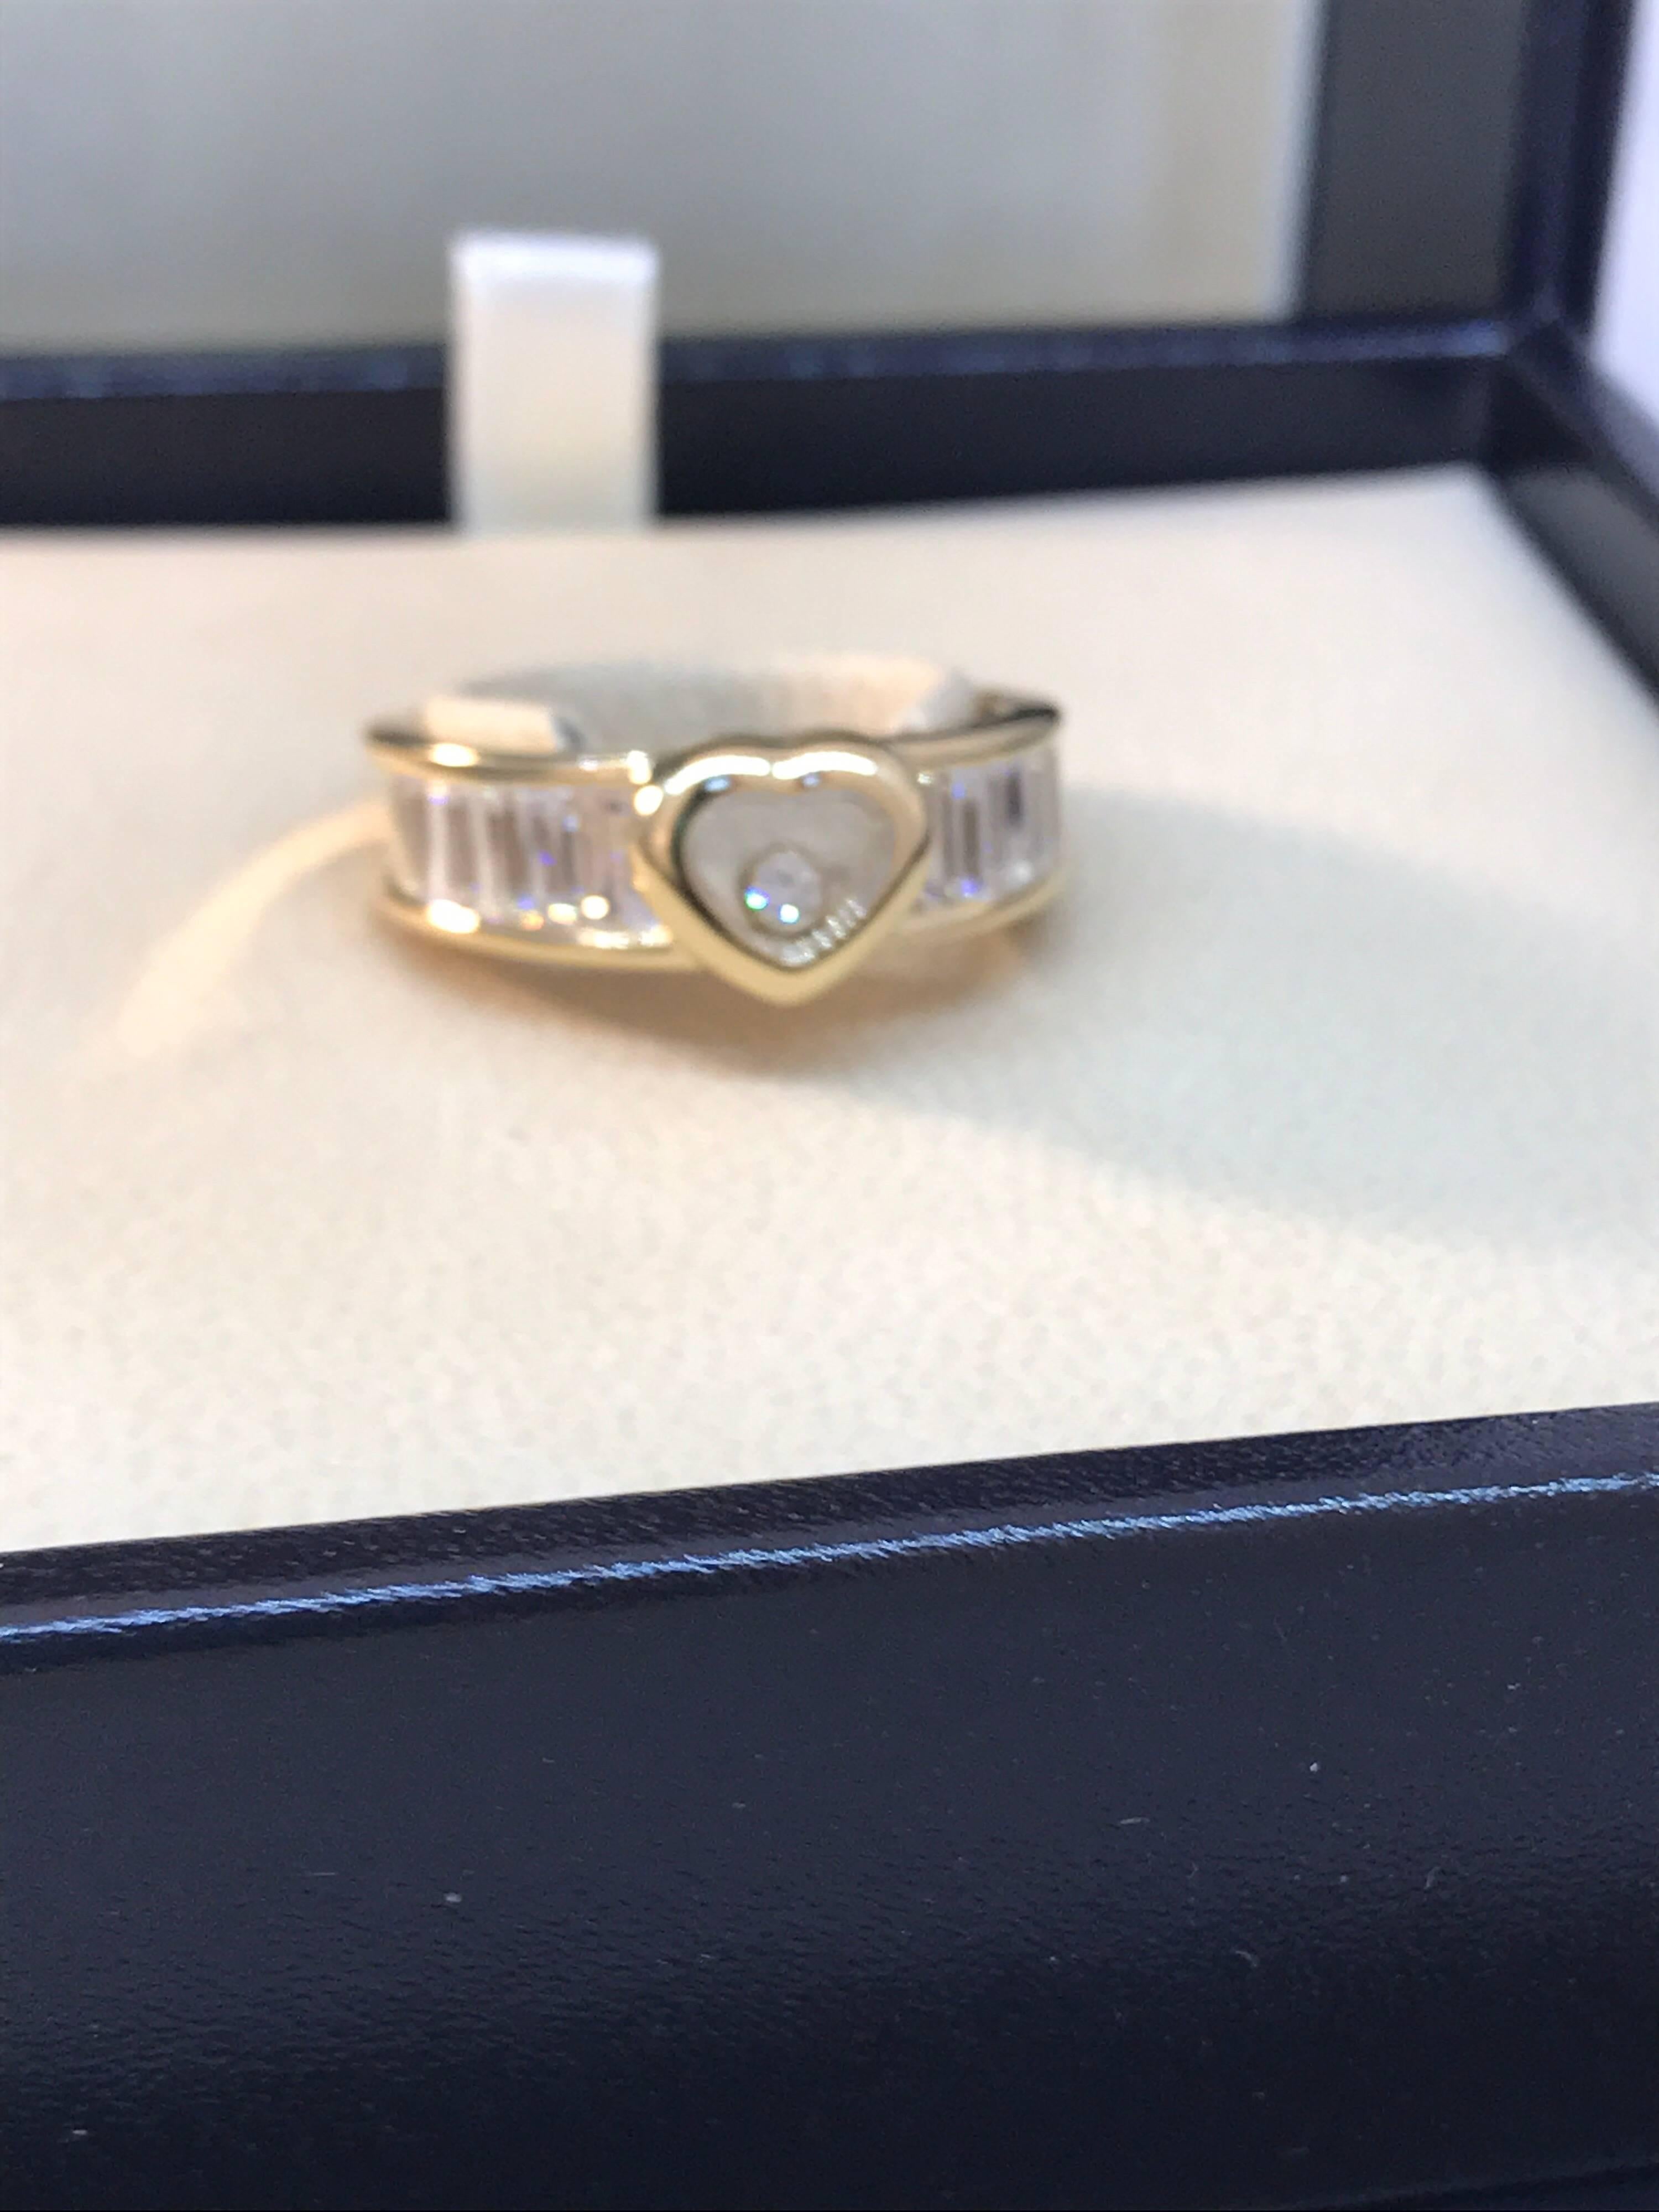 Chopard Happy Diamonds Heart Ring

Model Number: 82/2853-0113

100% Authentic

Brand New

Comes with original Chopard box, certificate of authenticity and warranty, and jewels manual

18 Karat Yellow Gold (8.50gr)

10 Trapeze Diamonds on the ring